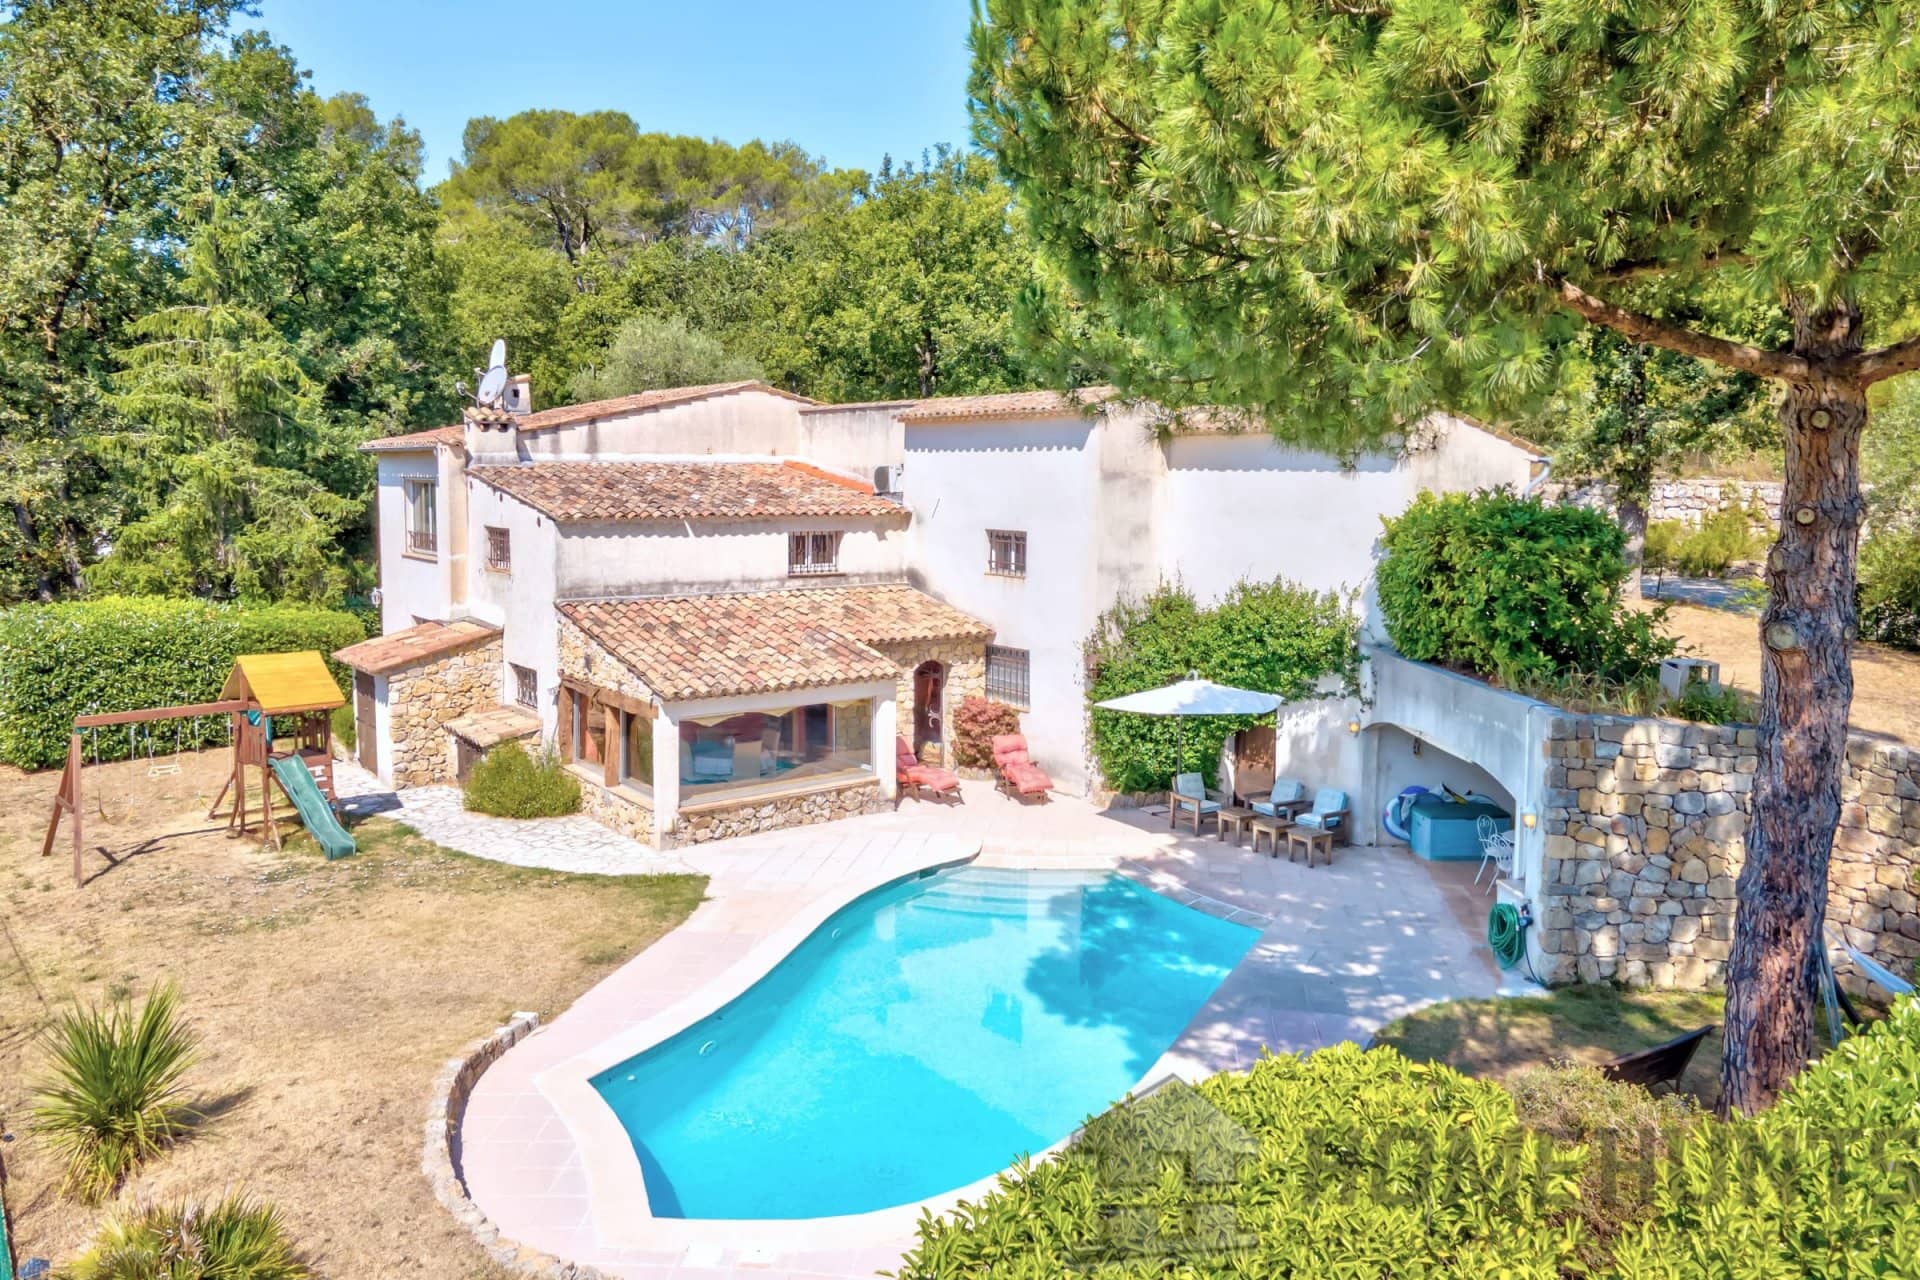 Villa/House For Sale in Chateauneuf Grasse 18